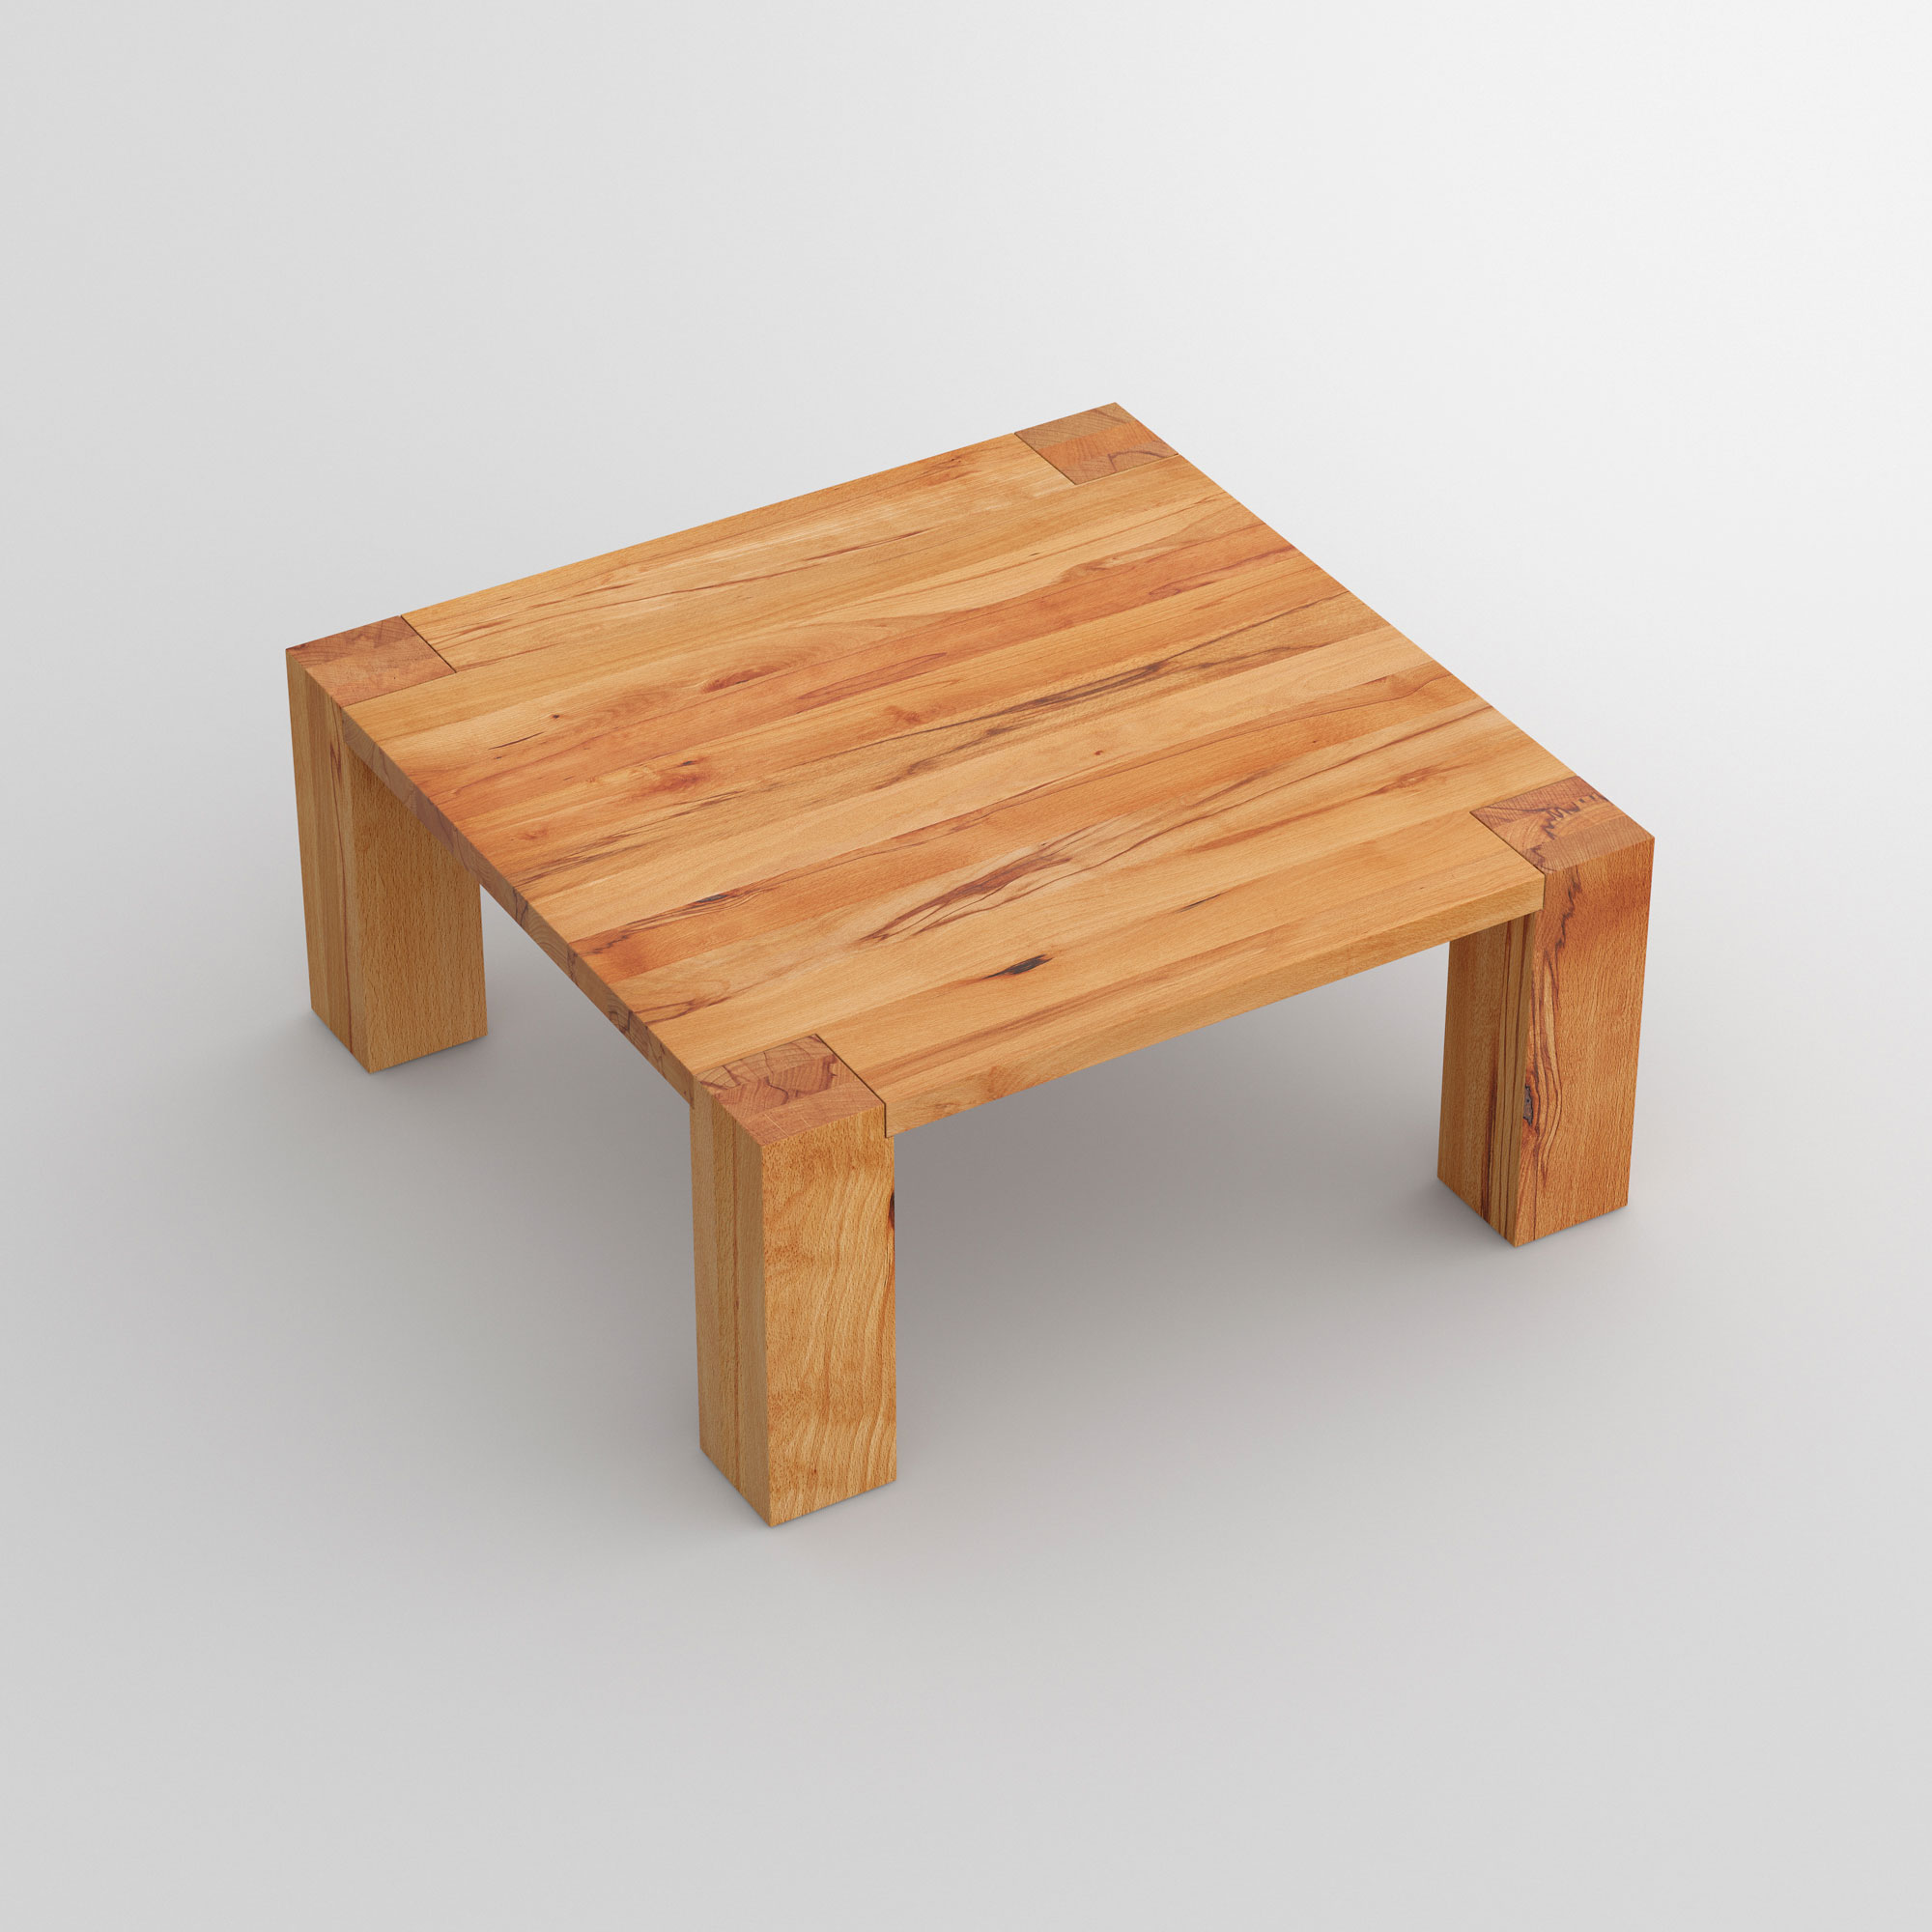 Solid Wood Coffee Table TAURUS 4 B14X14 cam3 custom made in solid wood by vitamin design